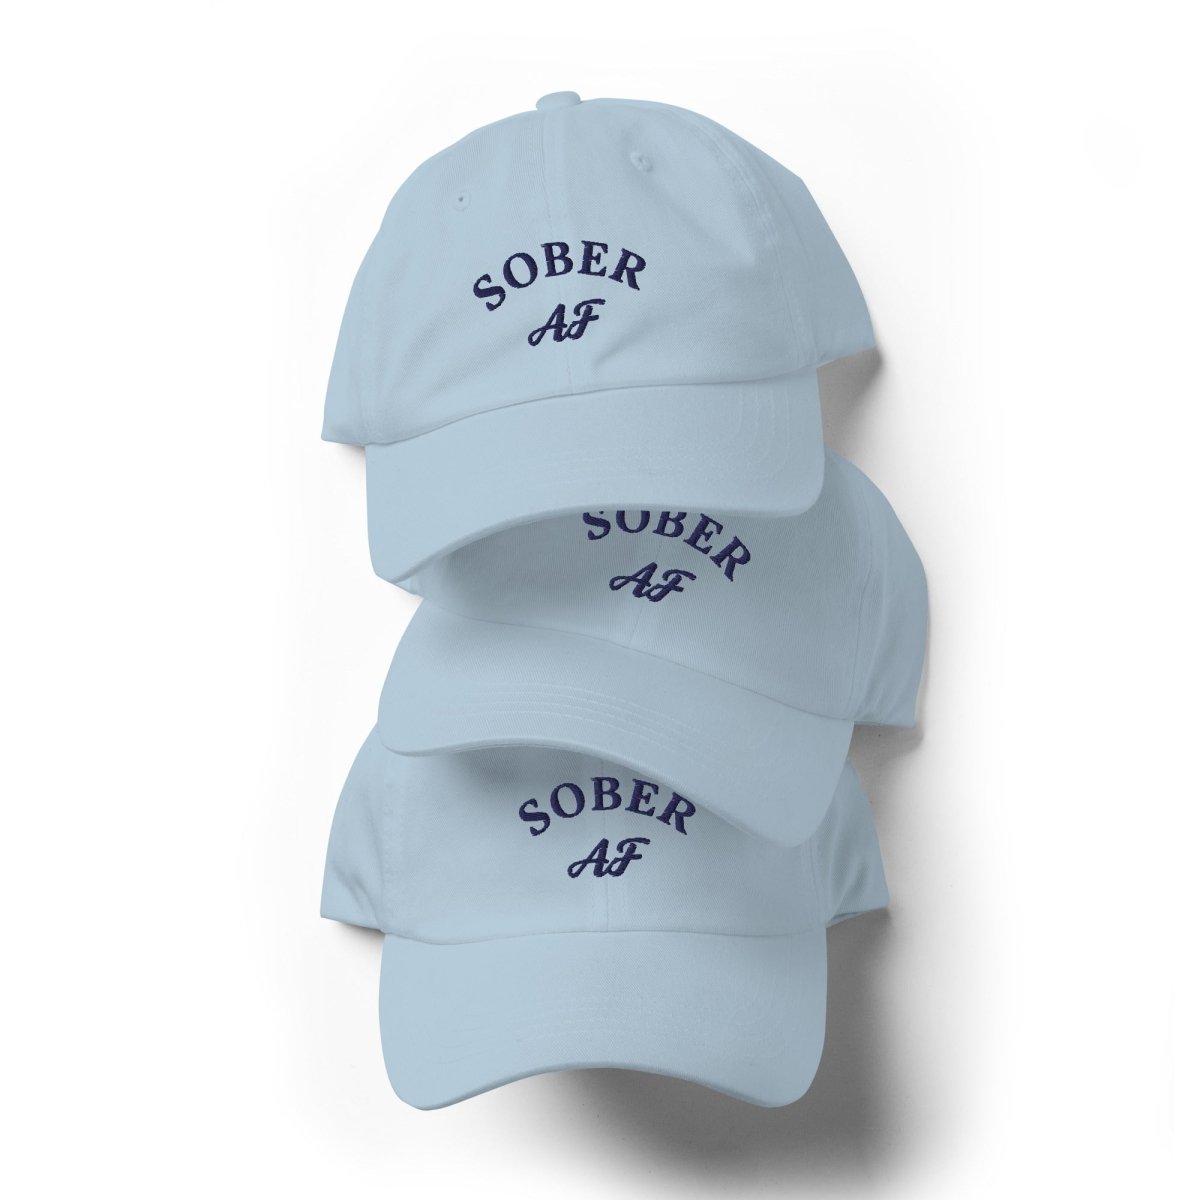 Sober AF: Celebrate Your Sobriety with Style on Our Lighter-Colored Dad Hat - Sobervation